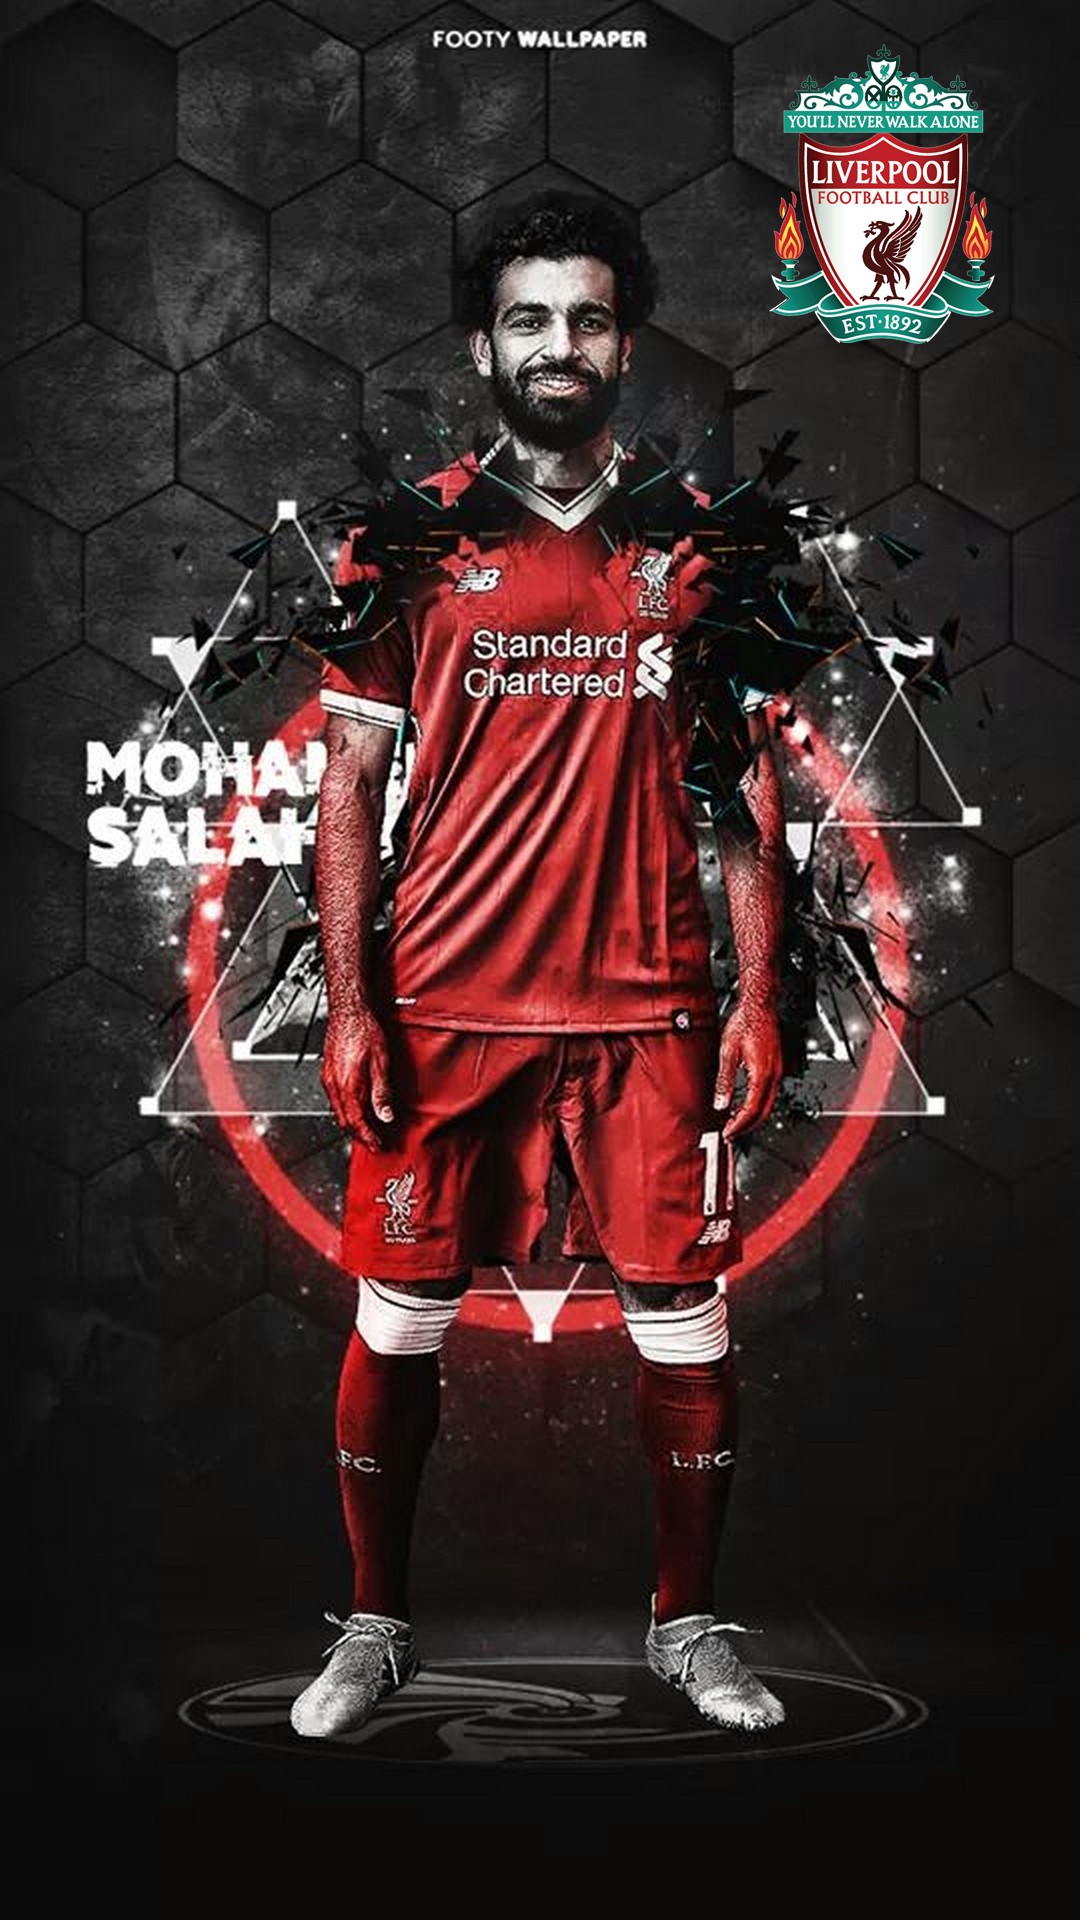 Wallpaper Android Mohamed Salah with resolution 1080X1920 pixel. You can make this wallpaper for your Android backgrounds, Tablet, Smartphones Screensavers and Mobile Phone Lock Screen